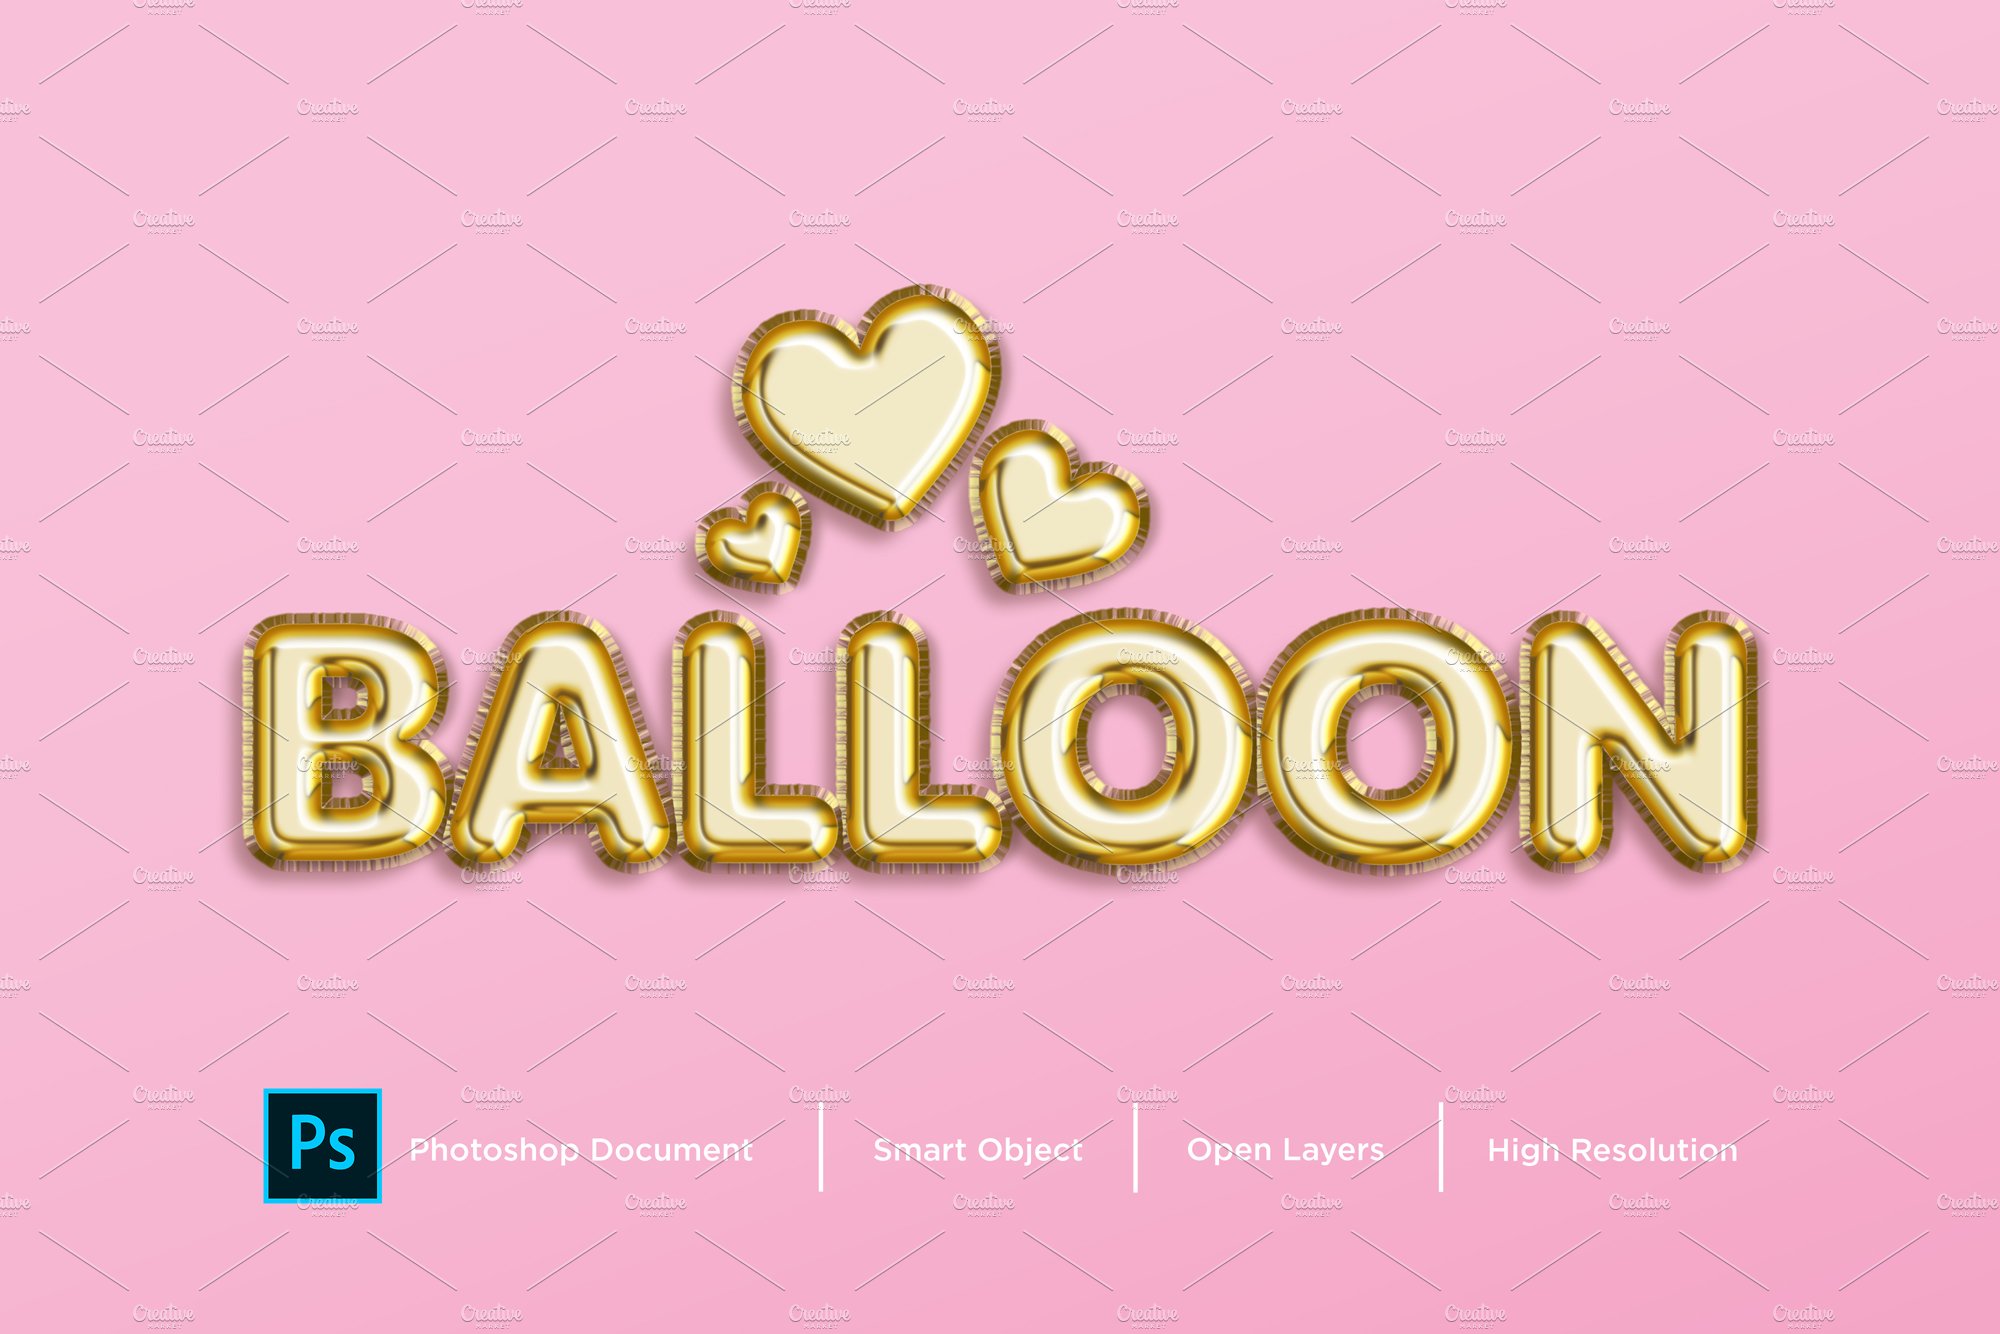 Balloon Text Effect & Layer Stylecover image.